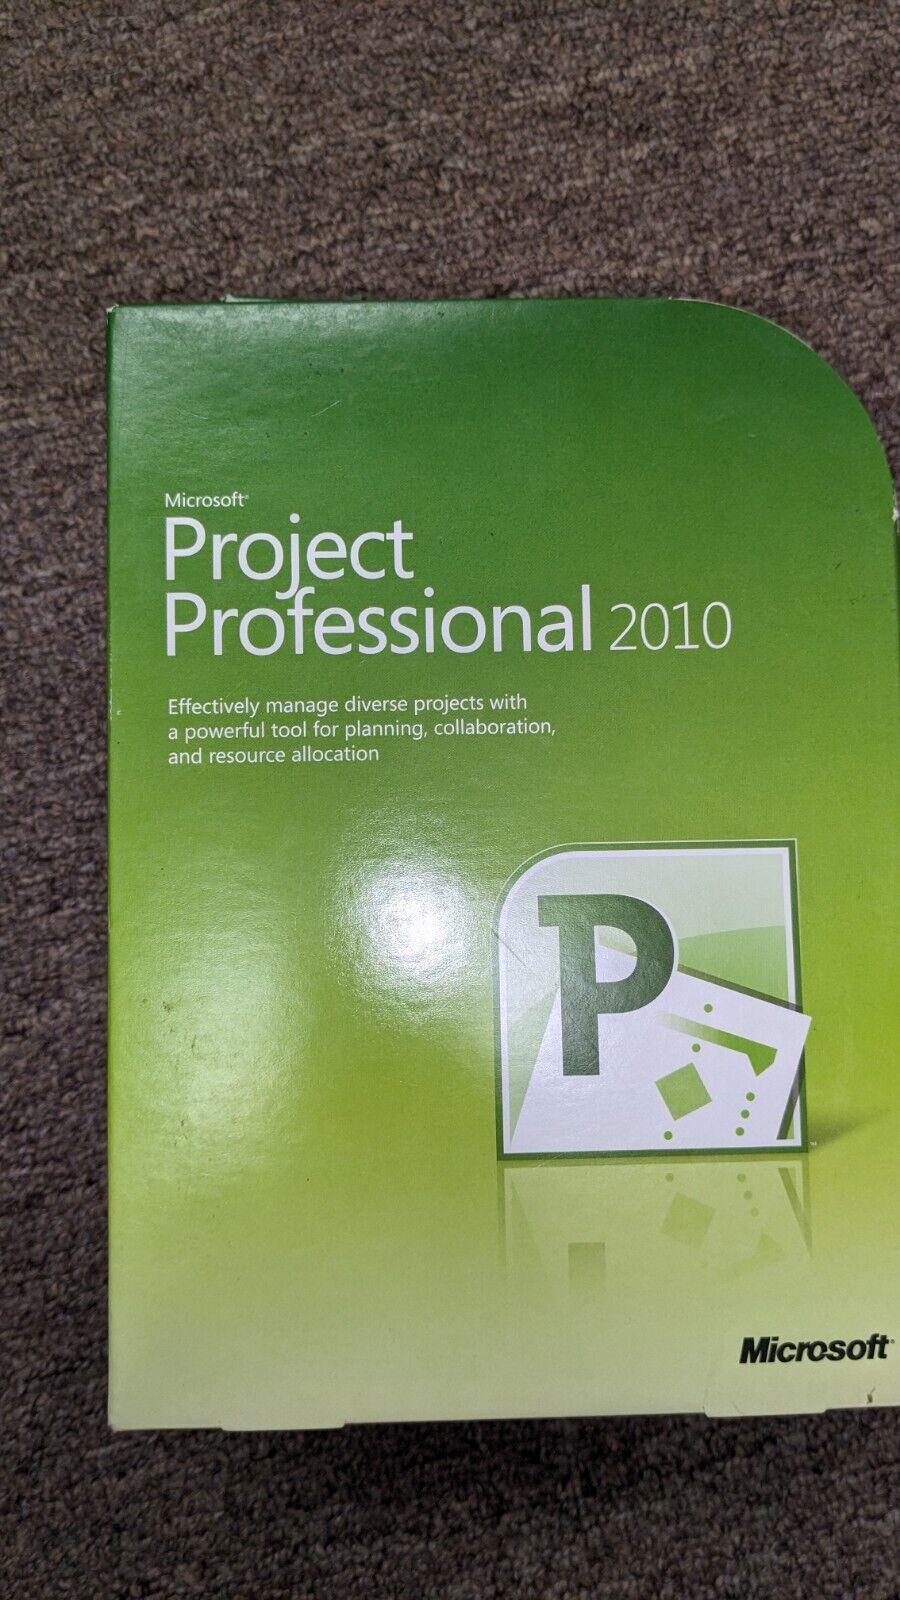 NEW Microsoft Project Professional 2010 Full Version RETAIL SEALED Box